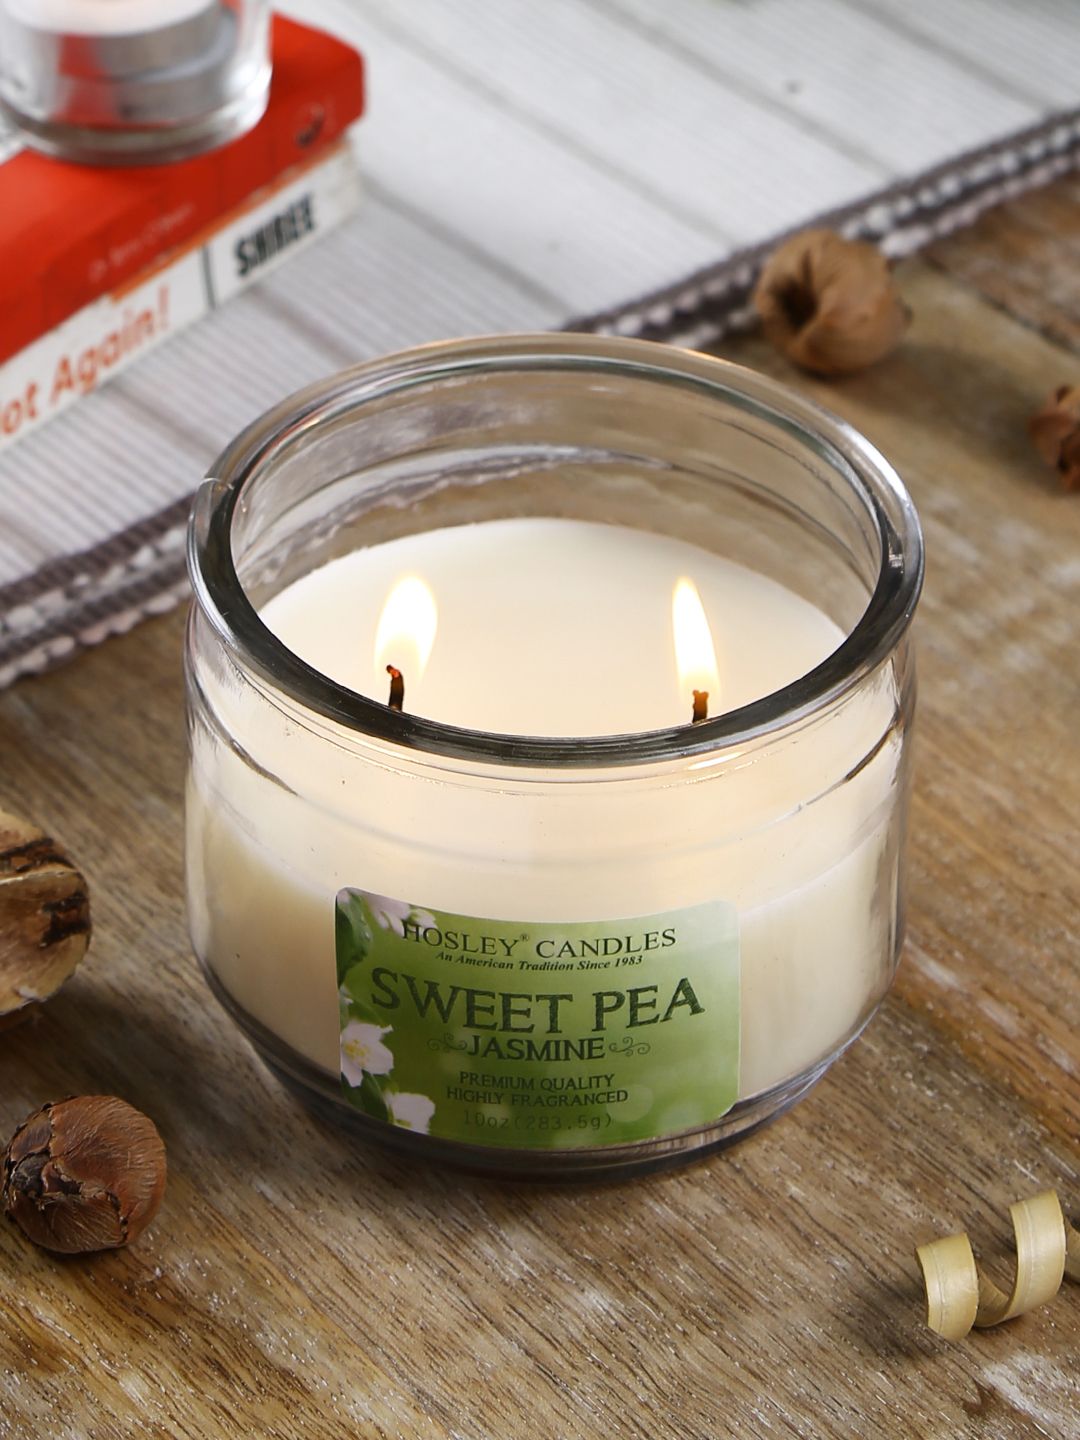 Hosley Cream-Coloured Sweet Pea Jasmine Scented Jar Candle With 2 Wicks 283 g Price in India